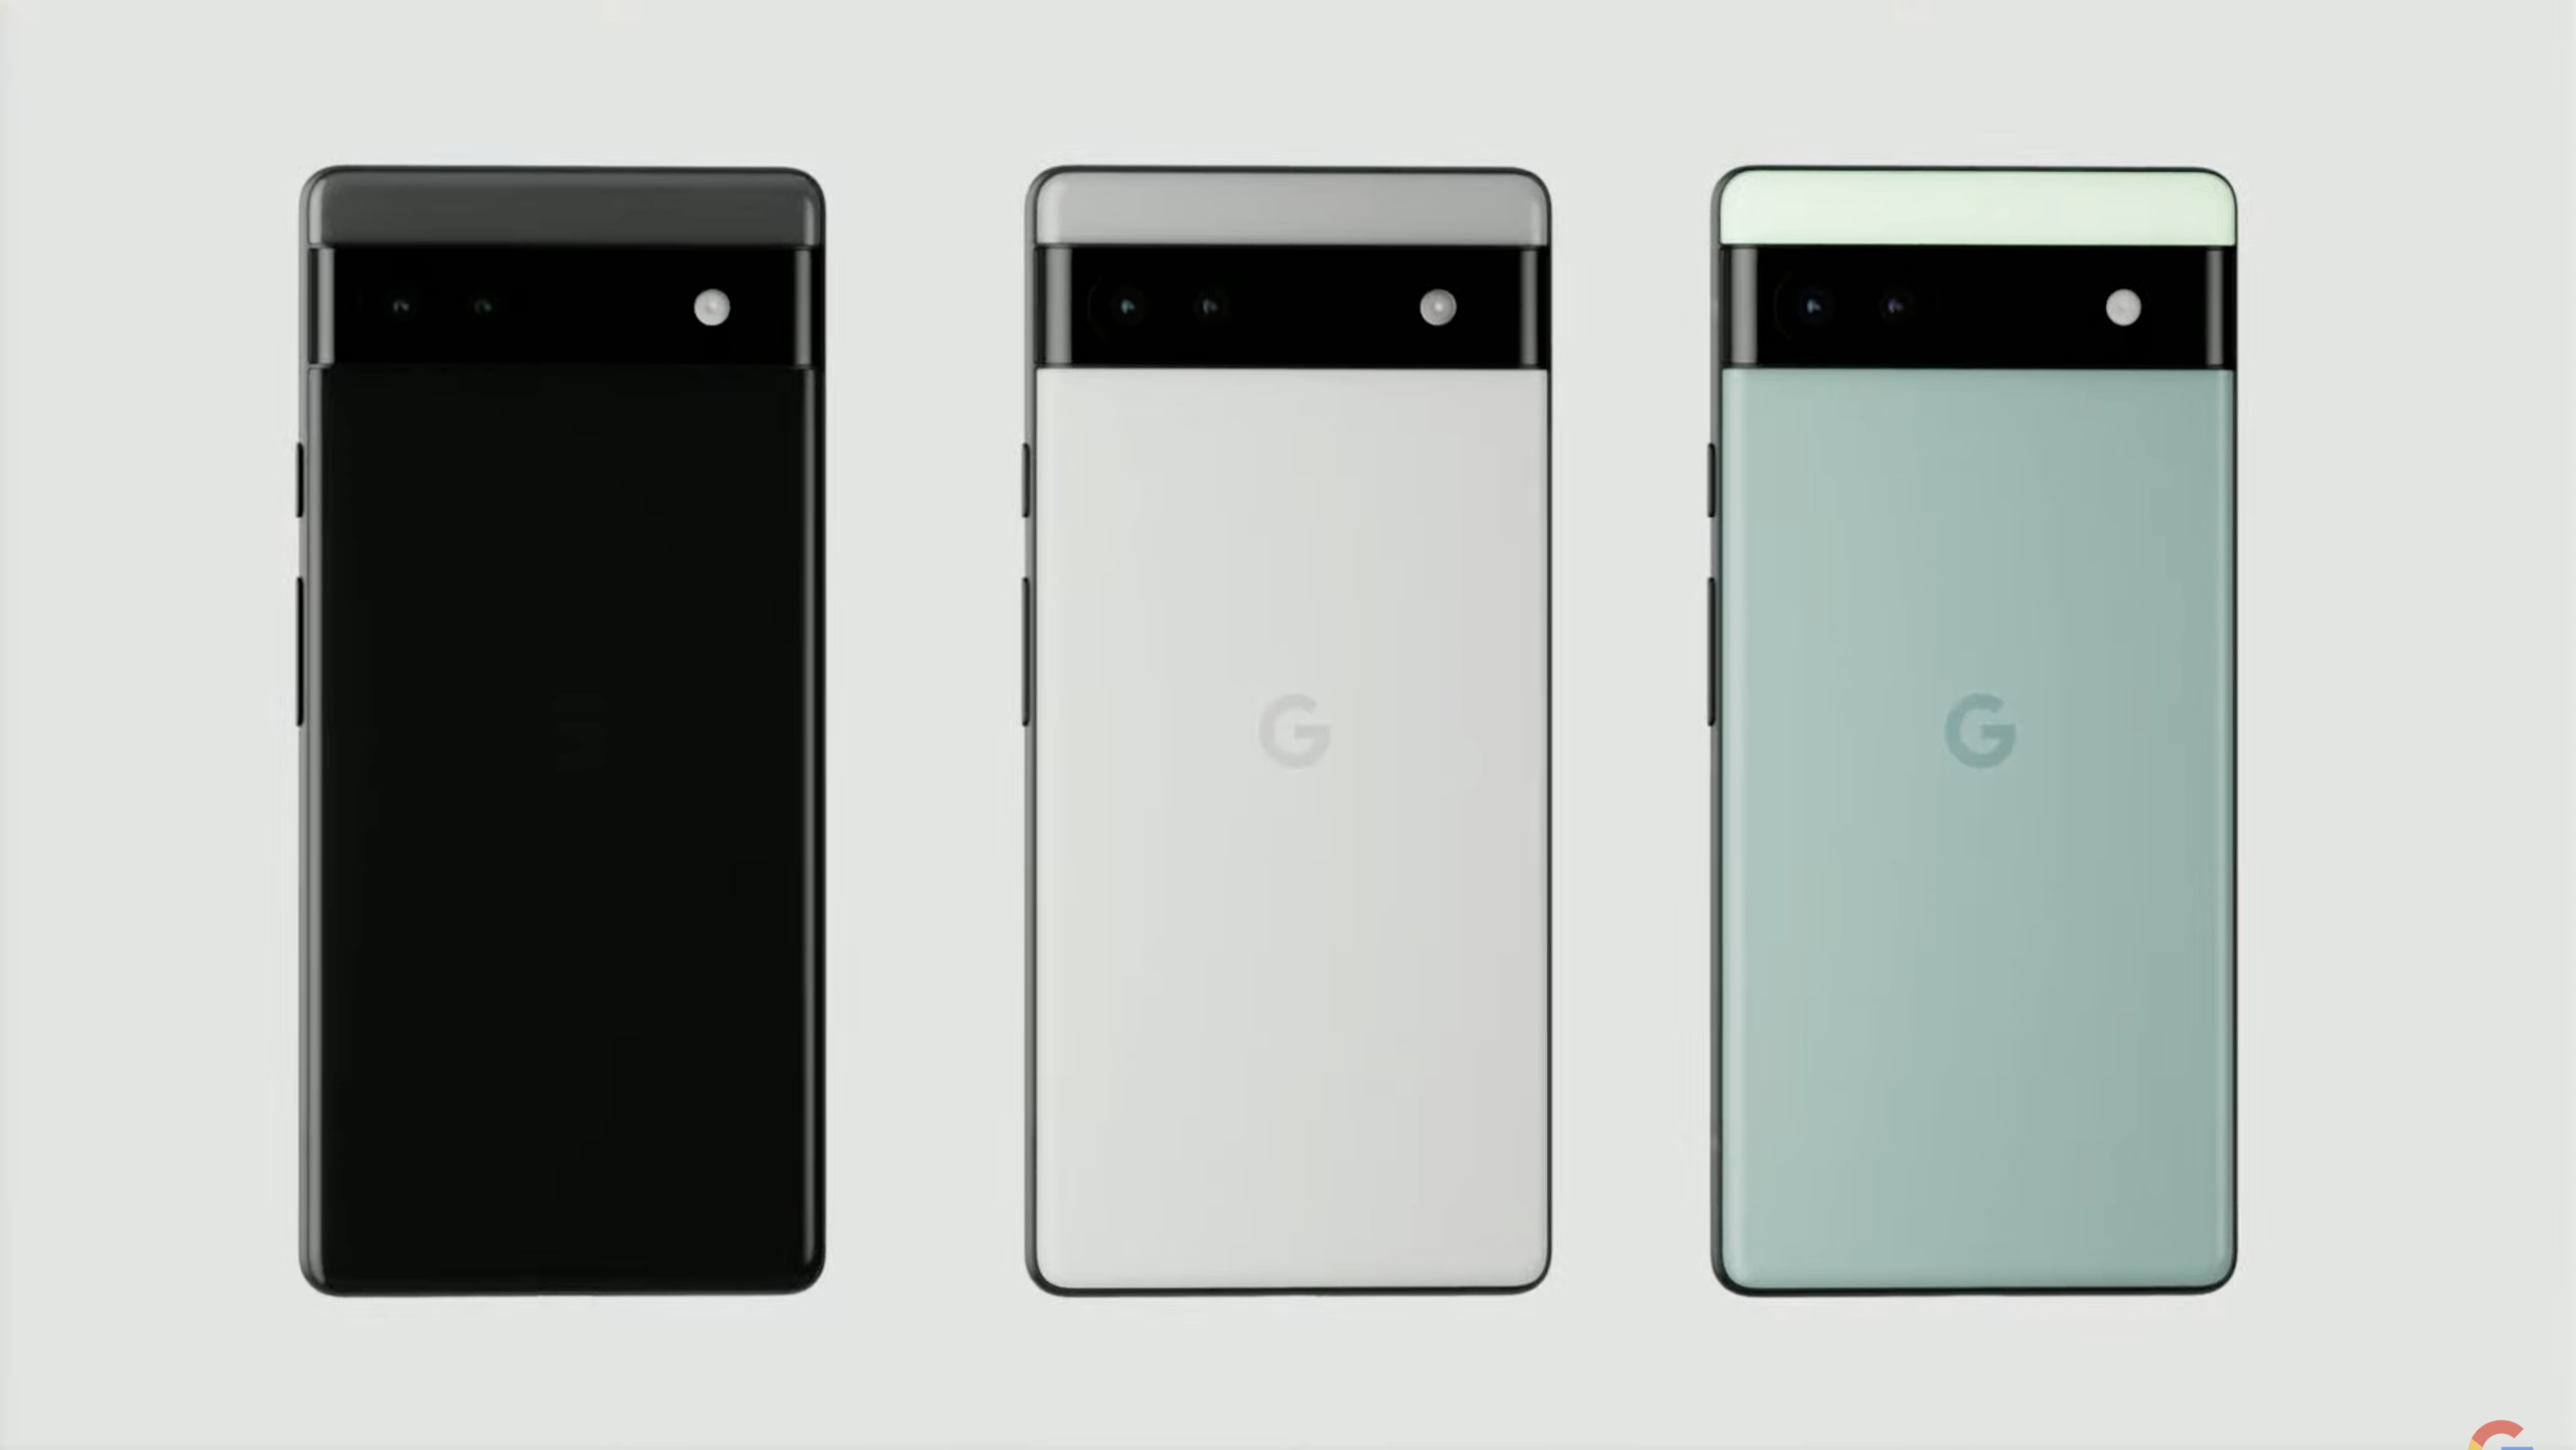 Google Pixel 6a reveal at IO 2022